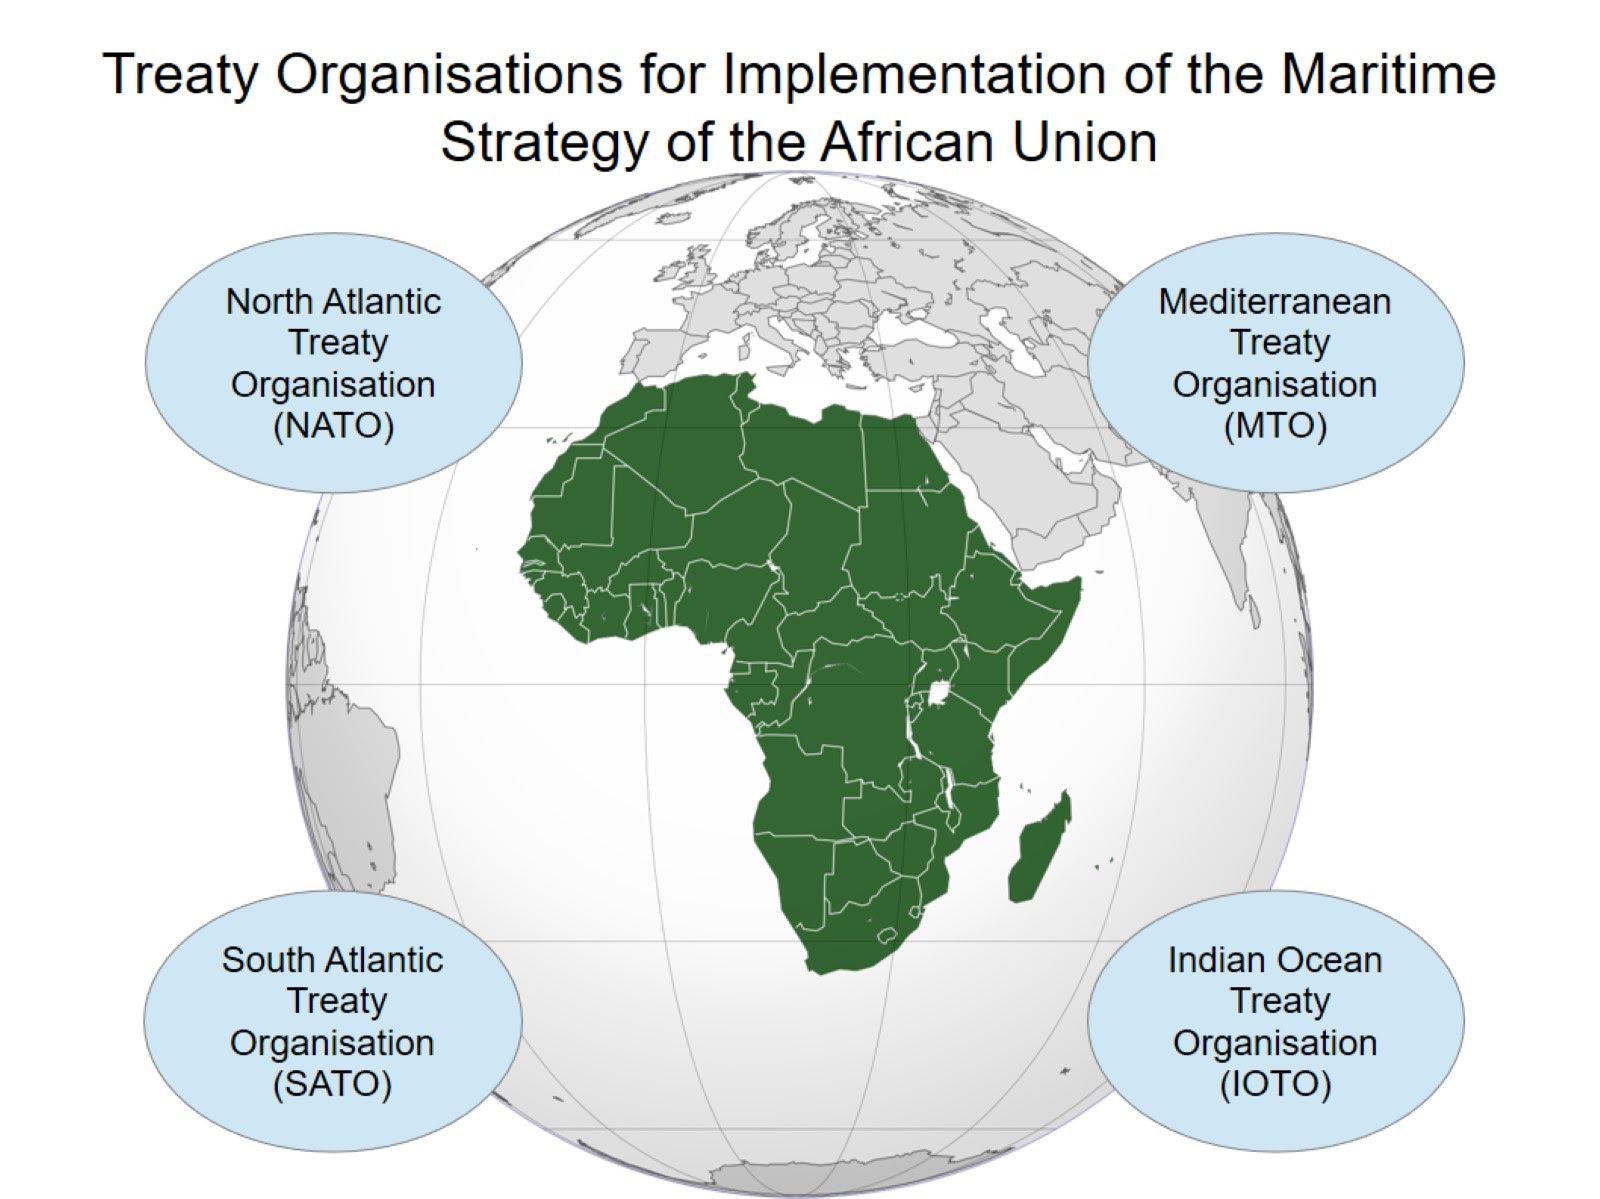 Developing three Military Treaty Organisations around the African Continent?